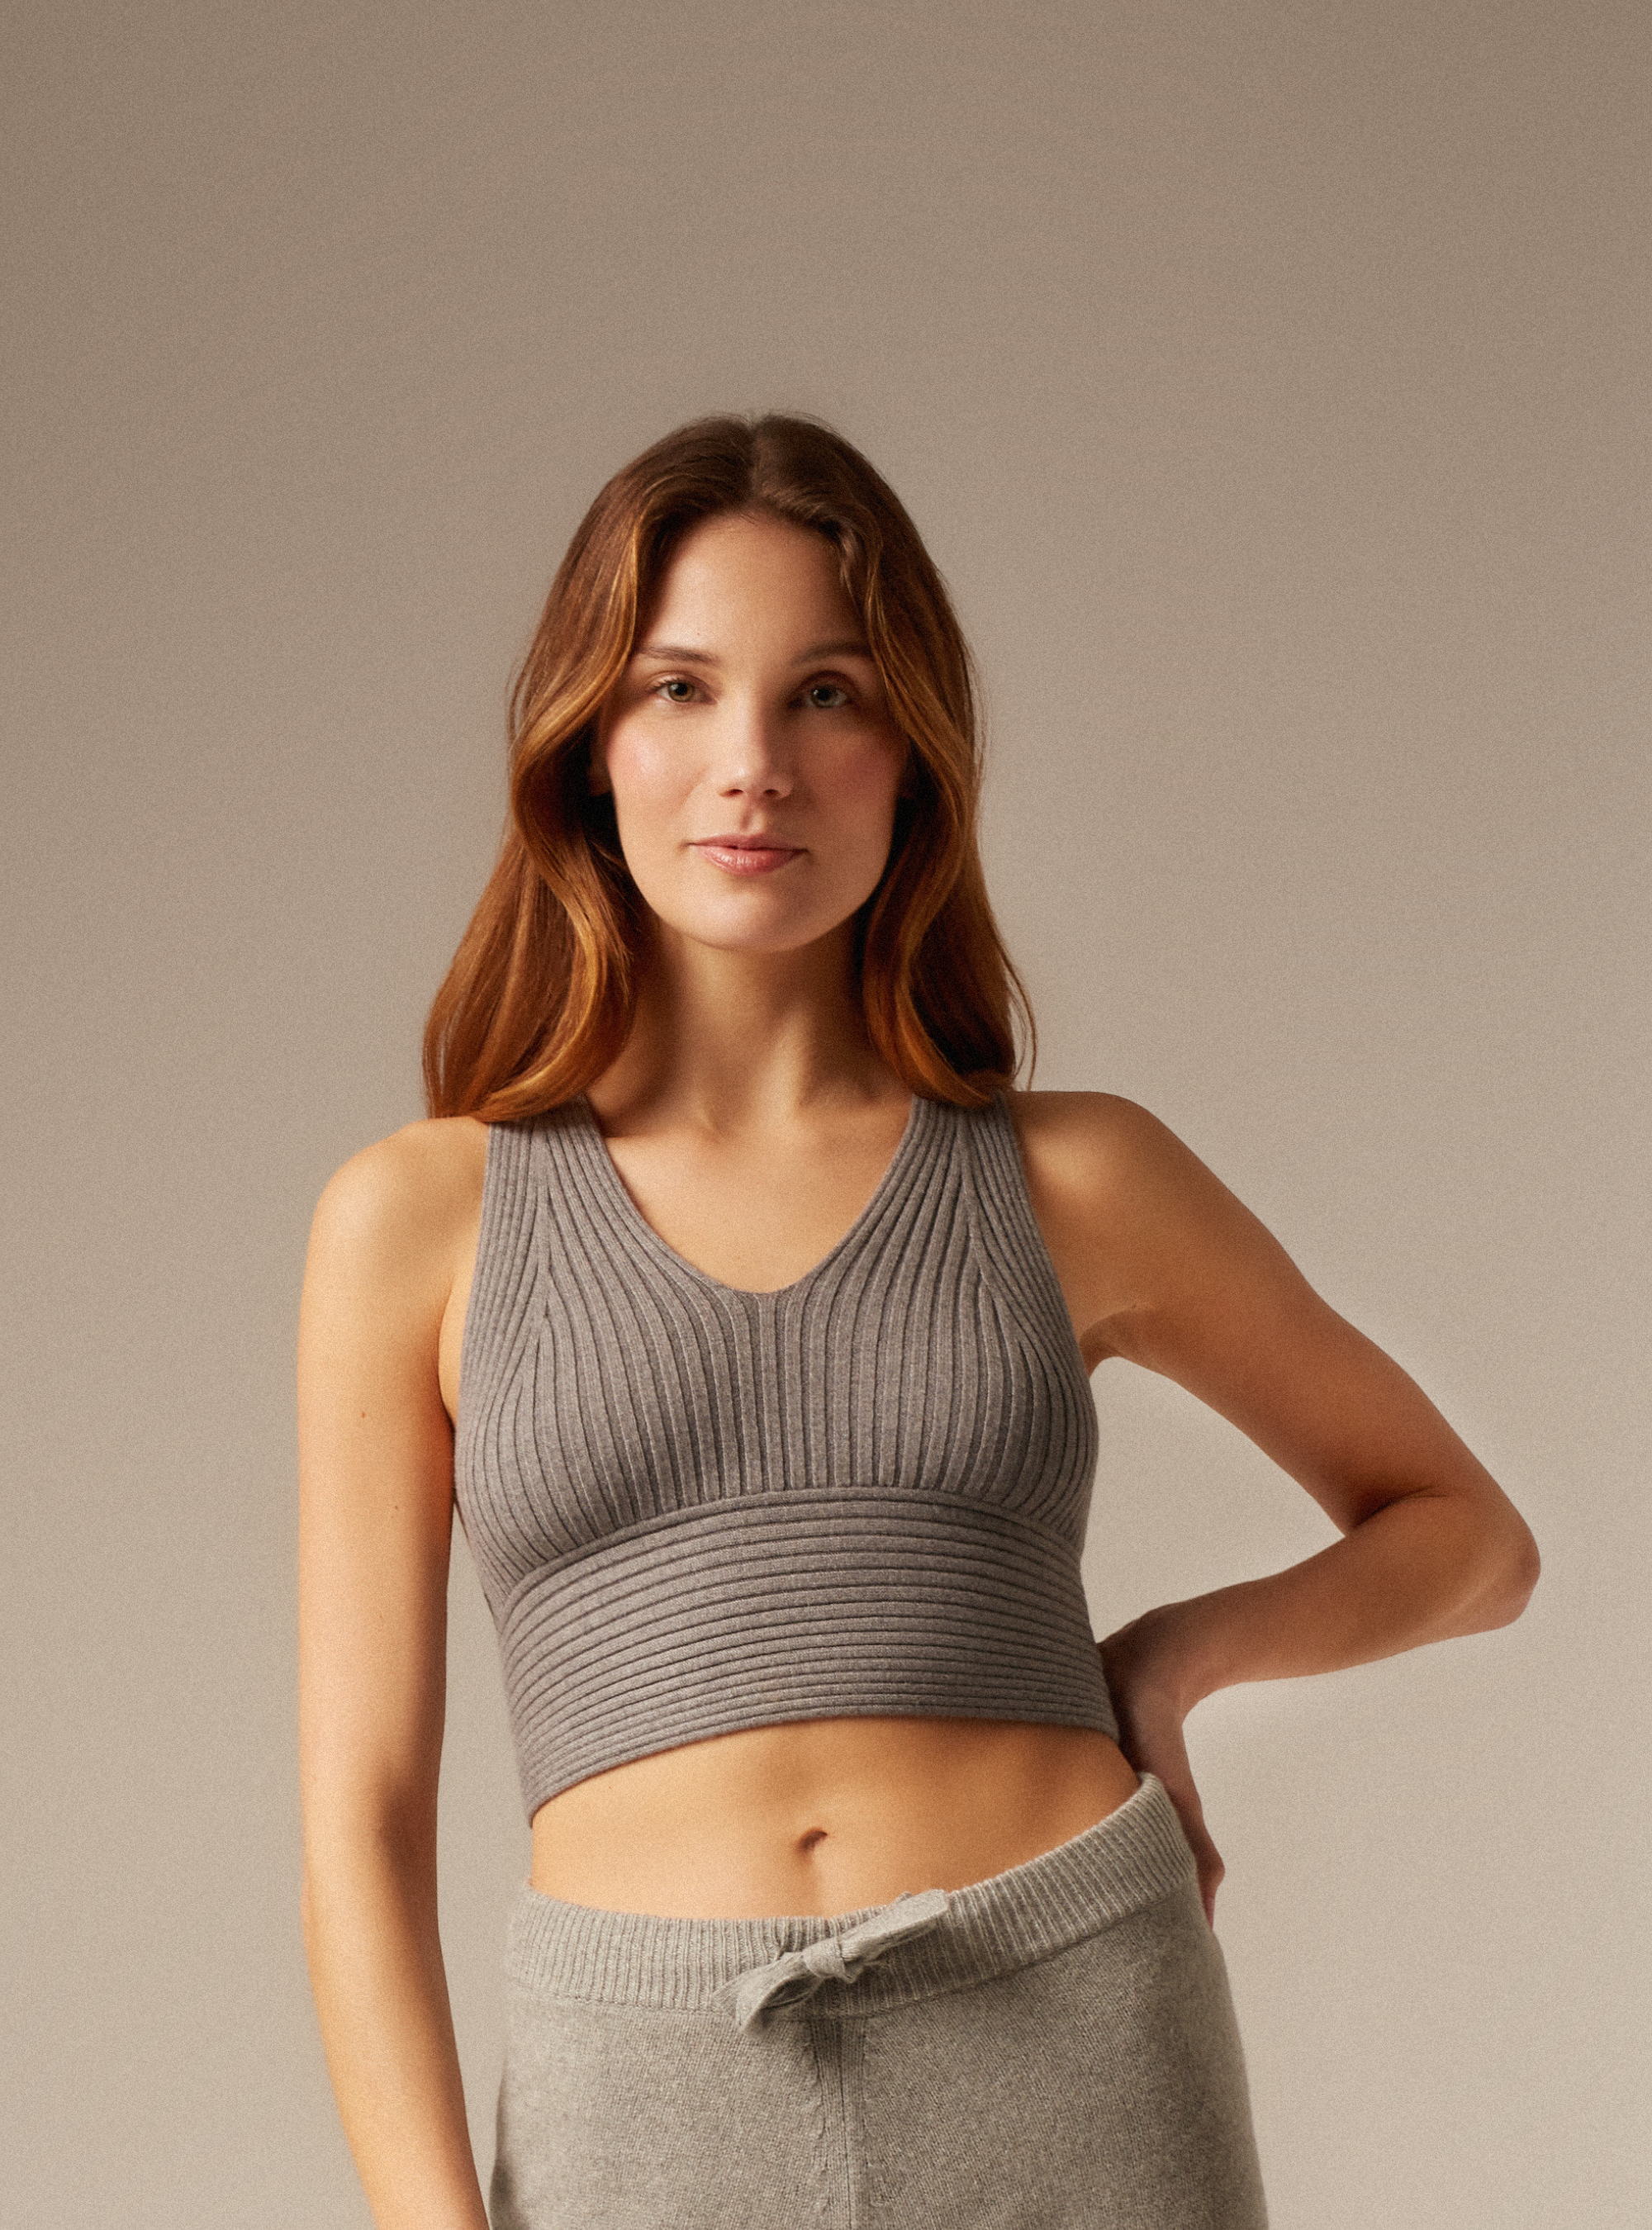 Cashmere knit cropped top bralette crossed back in grey